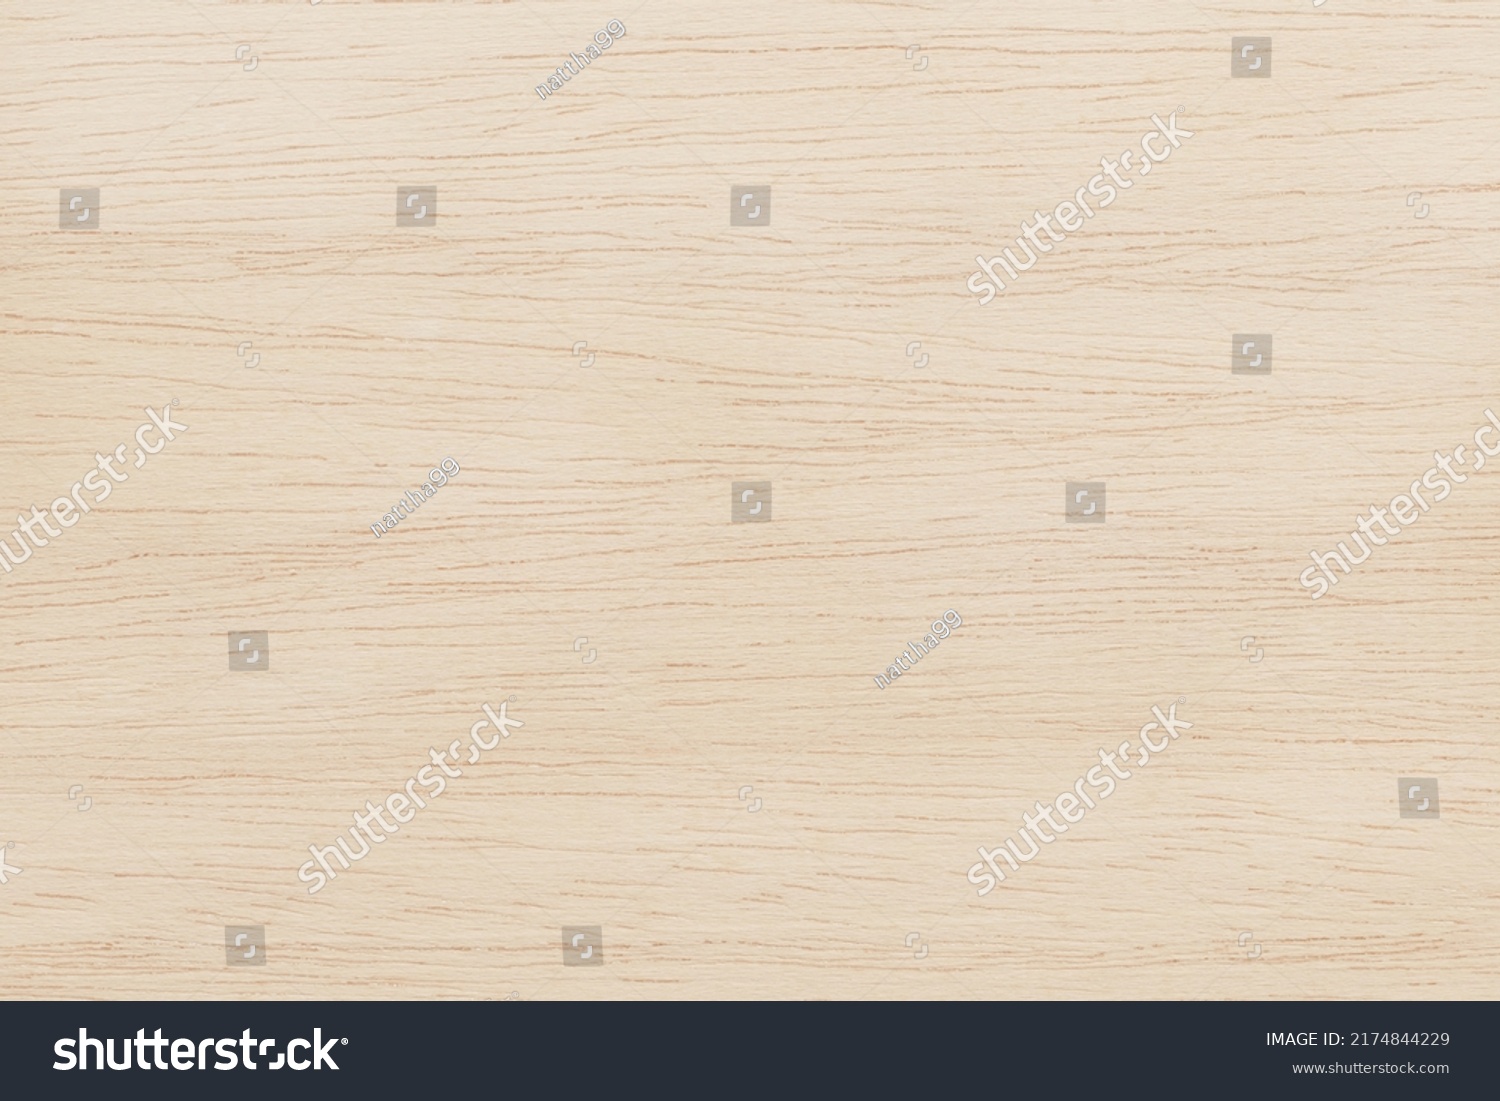 Plywood surface in natural pattern with high resolution. Wooden grained texture background. #2174844229